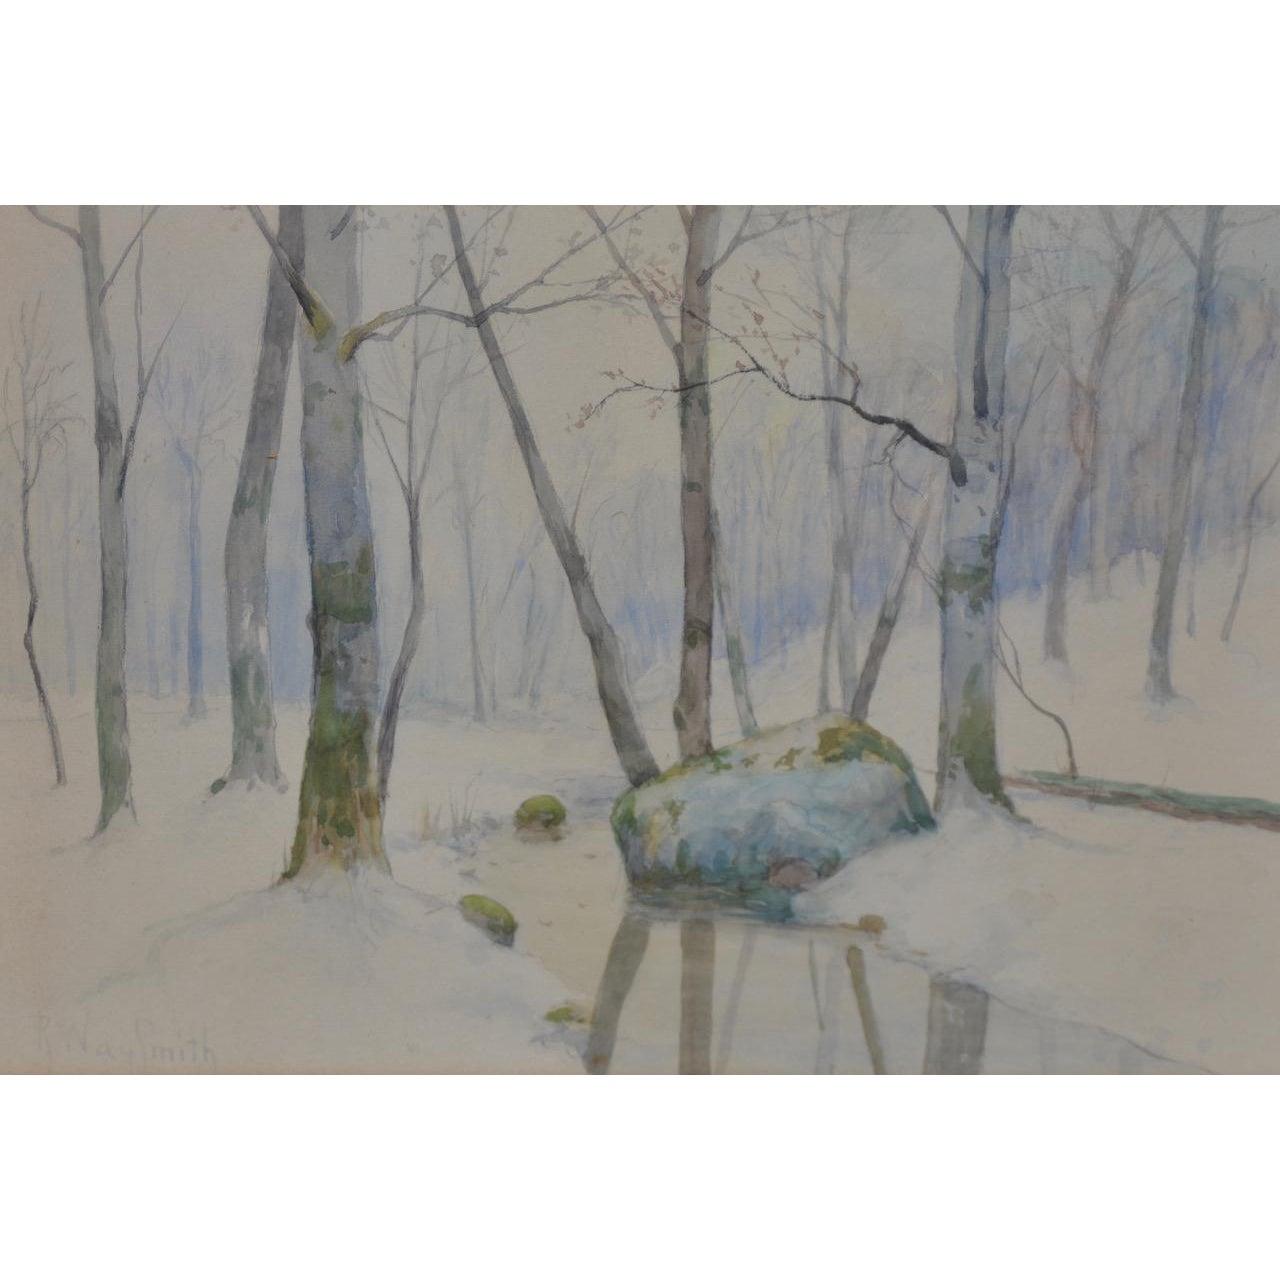 Rufus Way Smith Winter Forest Landscape Watercolor c.1880

Beautiful 19th century watercolor by listed American artist Rufus Way Smith (1840-1900).

Original watercolor on paper. Dimensions 14